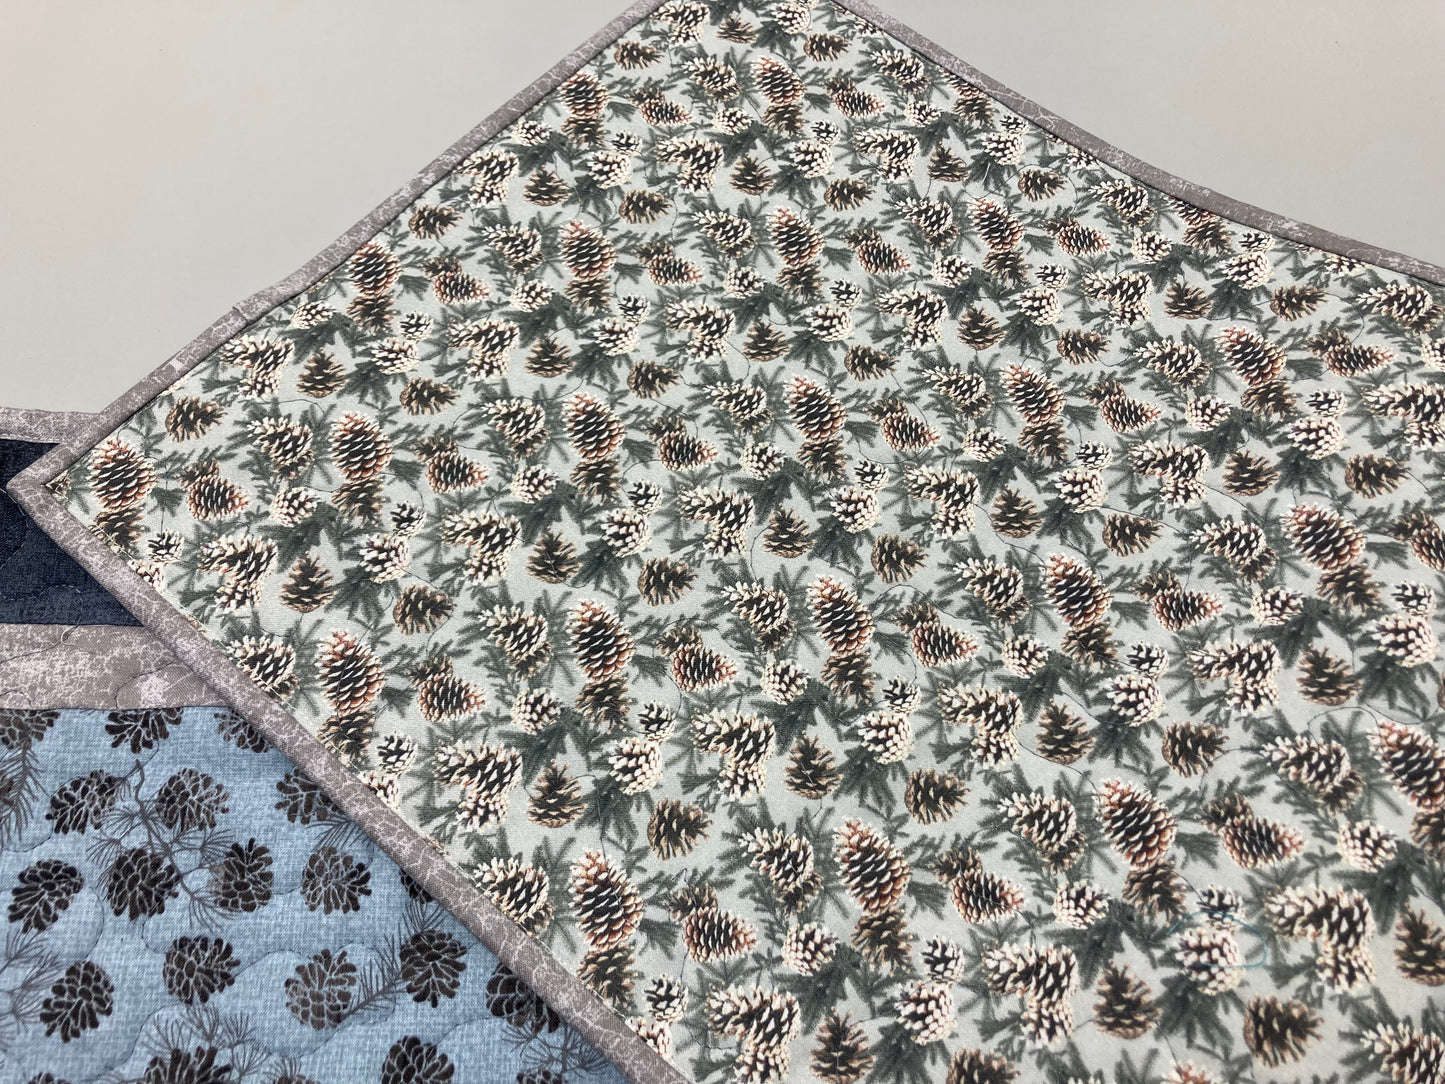 Mountain Pine Cones Quilted Dining Table Runner, 13x70 Reversible, Coffee End Table Cabin Everyday Nature Modern Blue Gray Black Handmade